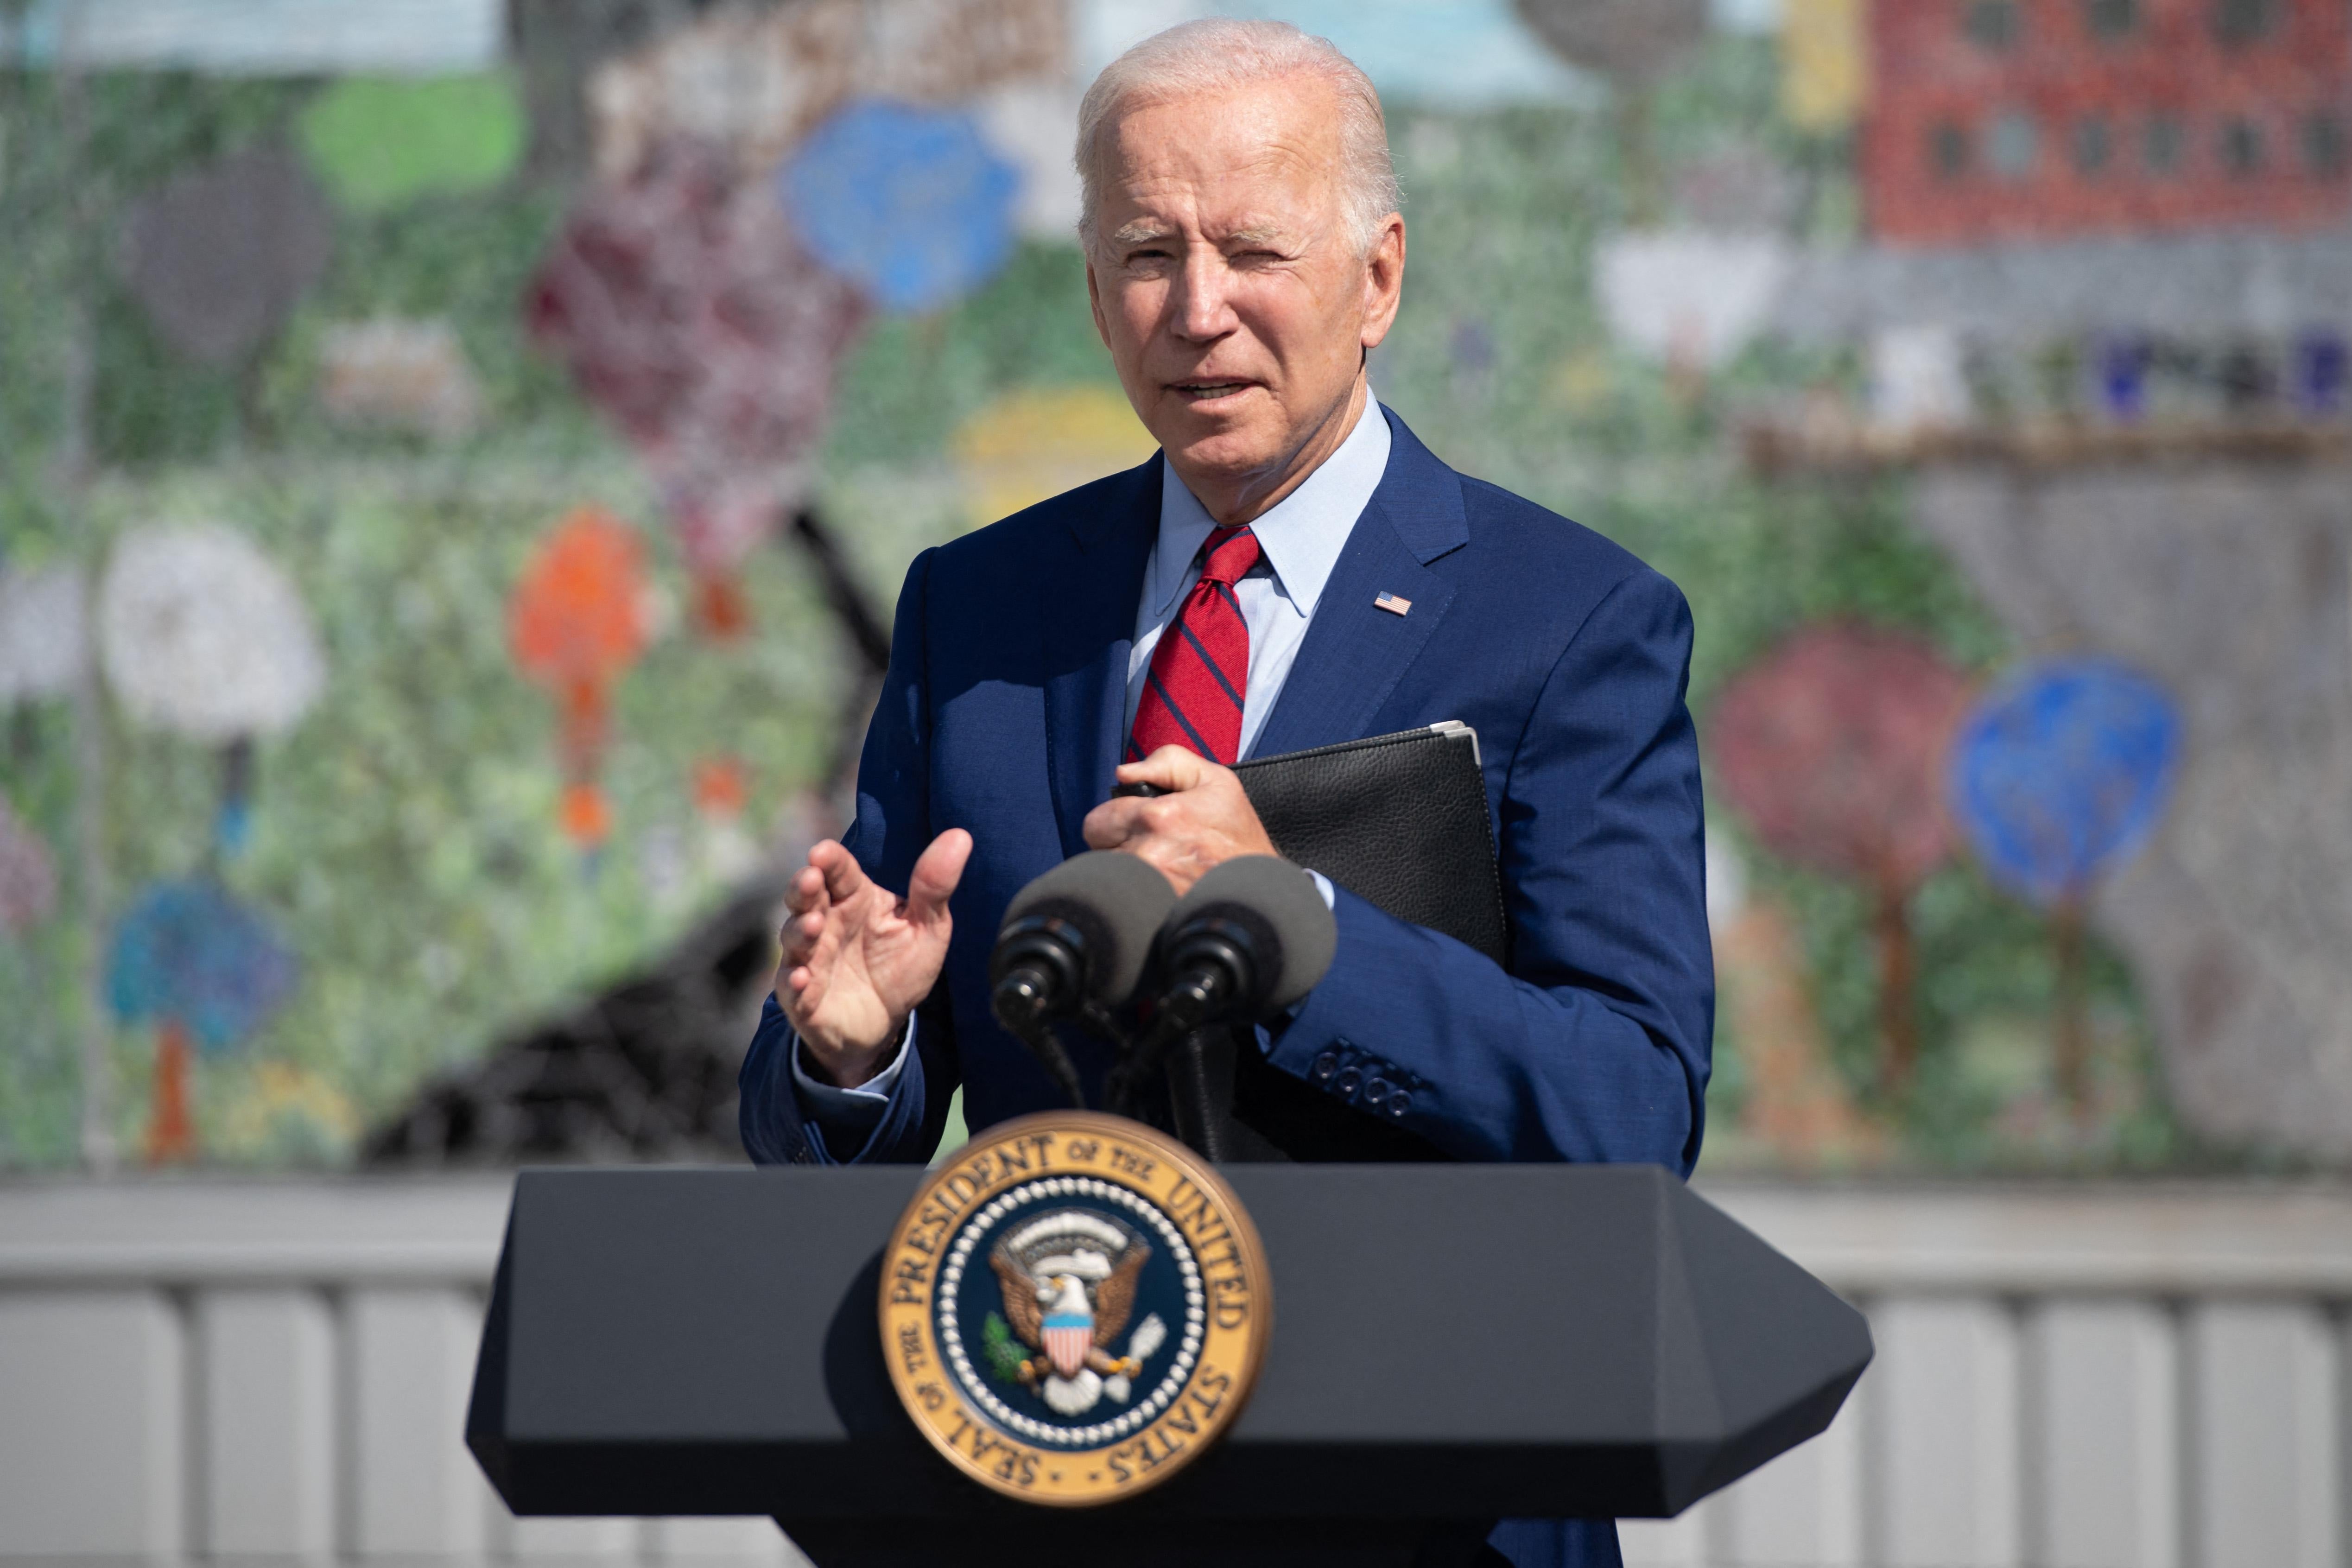 Joe Biden stands outside behind a presidential podium with a mural behind him.